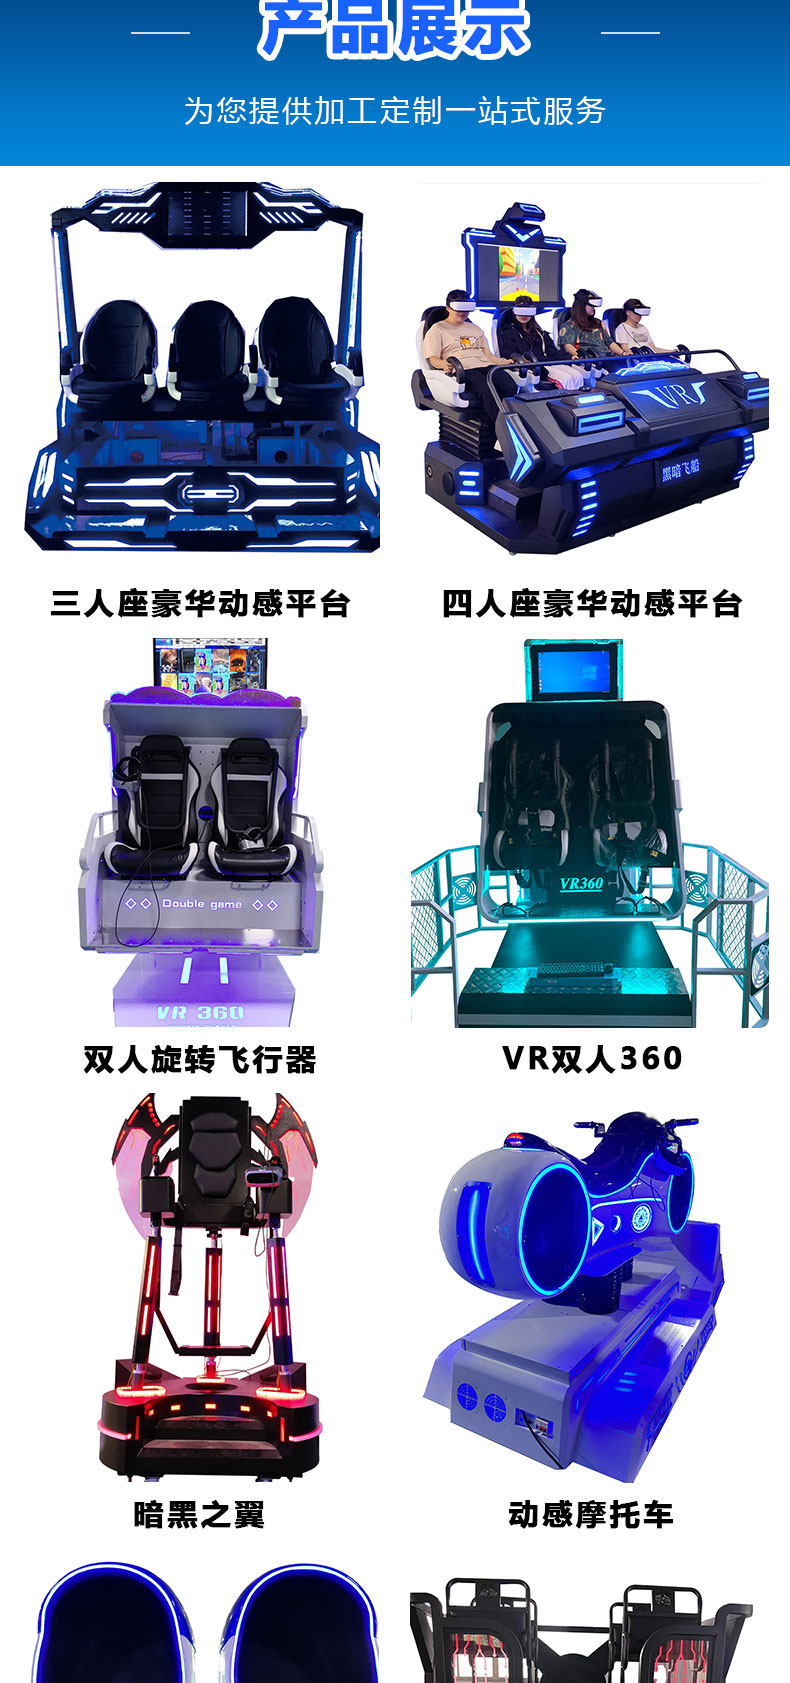 Single/double person VR roller coaster spin experience simulation safety seat mall VR game console equipment creation